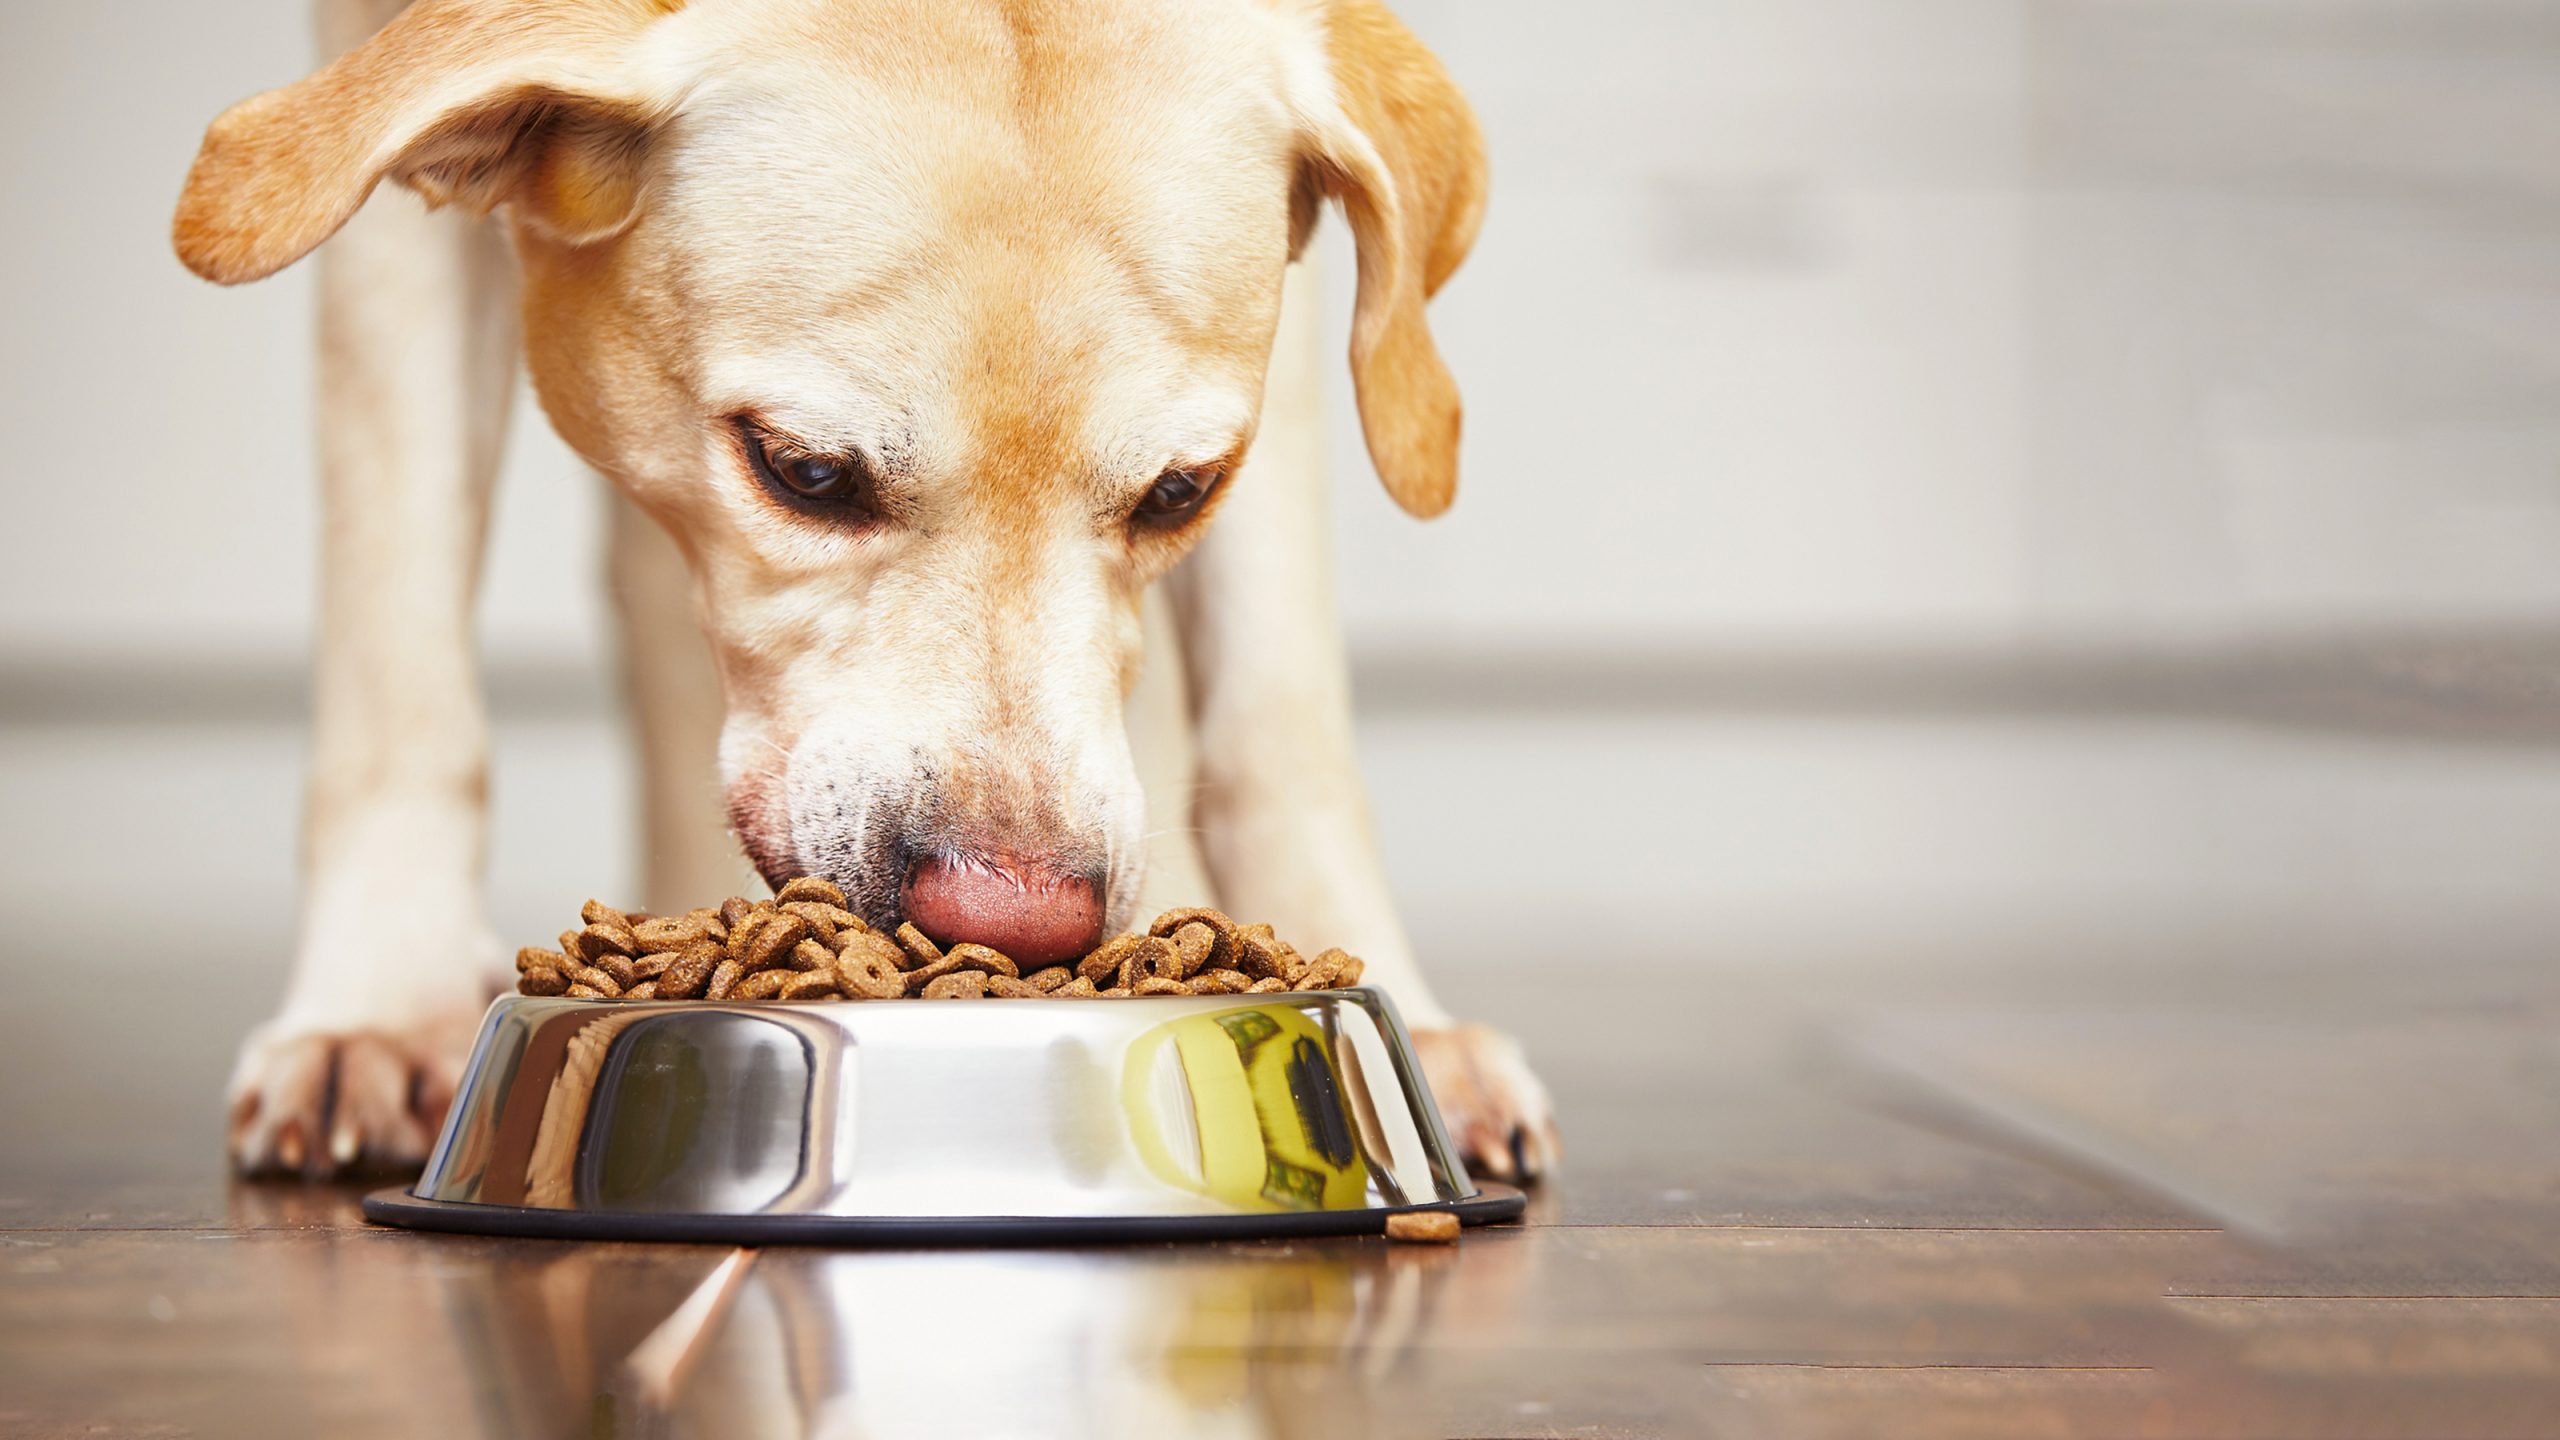 Food Guarding in Dogs